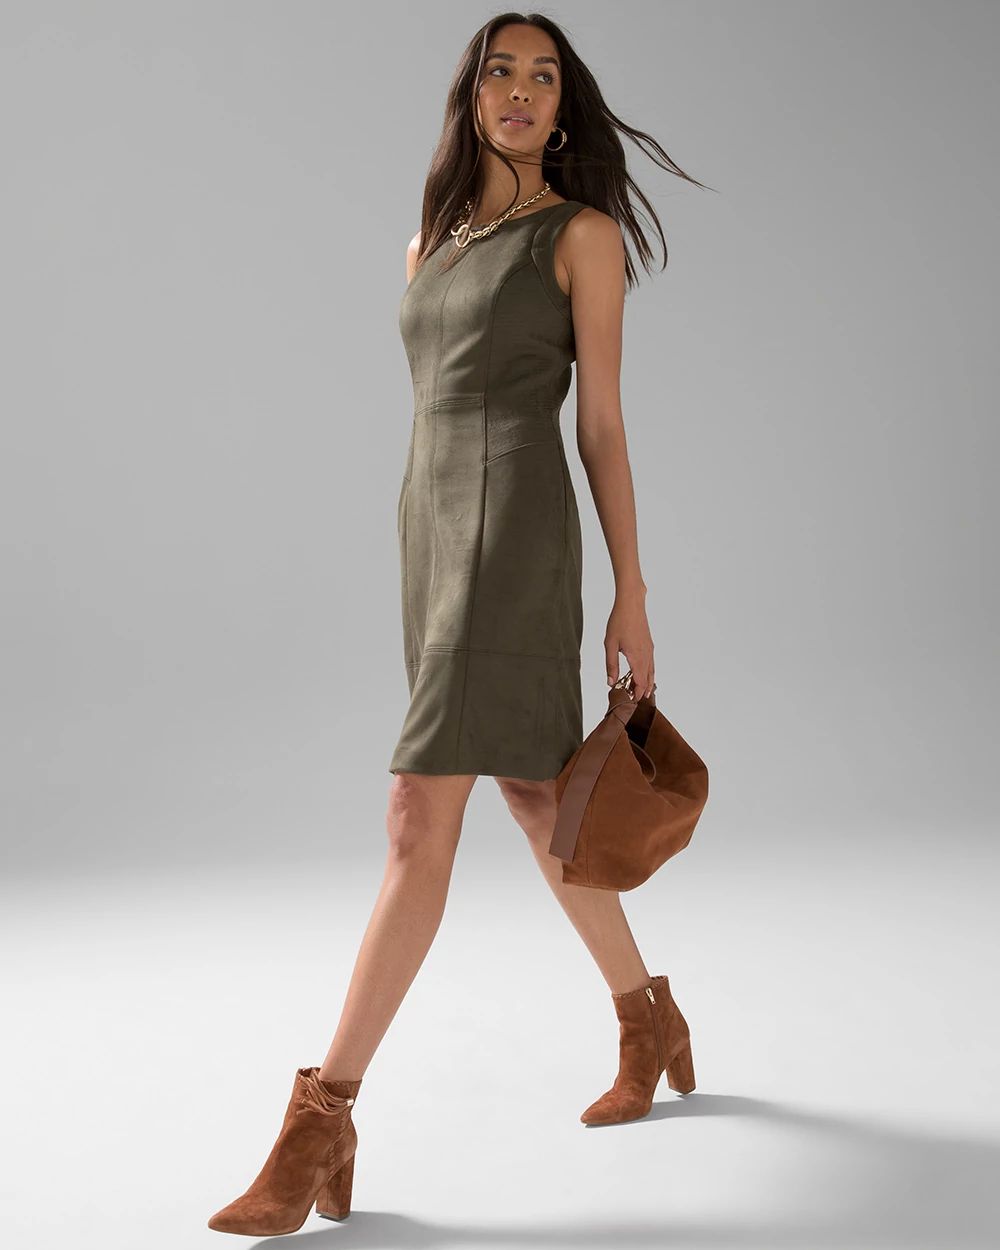 Sleeveless Vegan Suede Fit & Flare Dress click to view larger image.